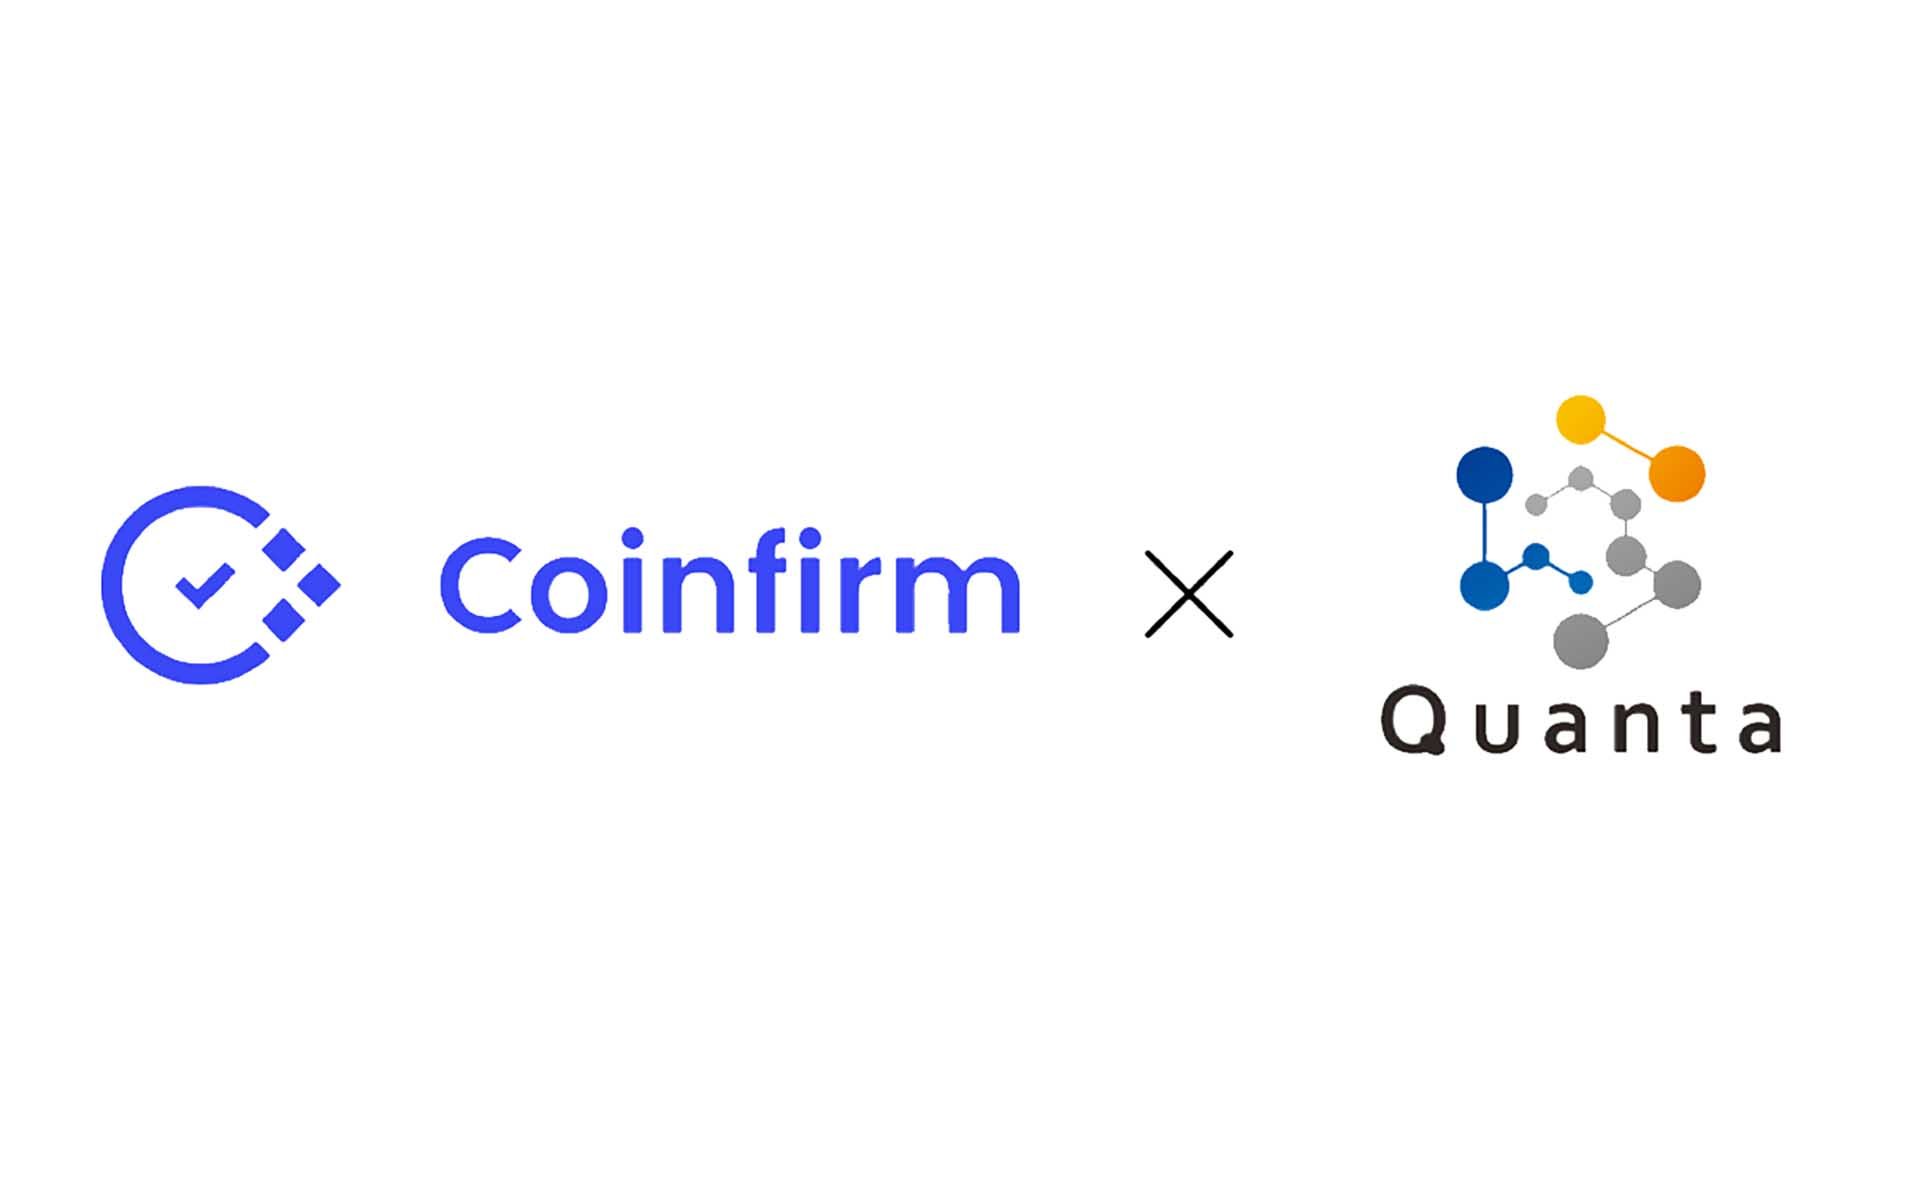 Quanta Partners with Coinfirm to Bring Compliance and Mass Adoption to Their Blockchain Lottery Platform